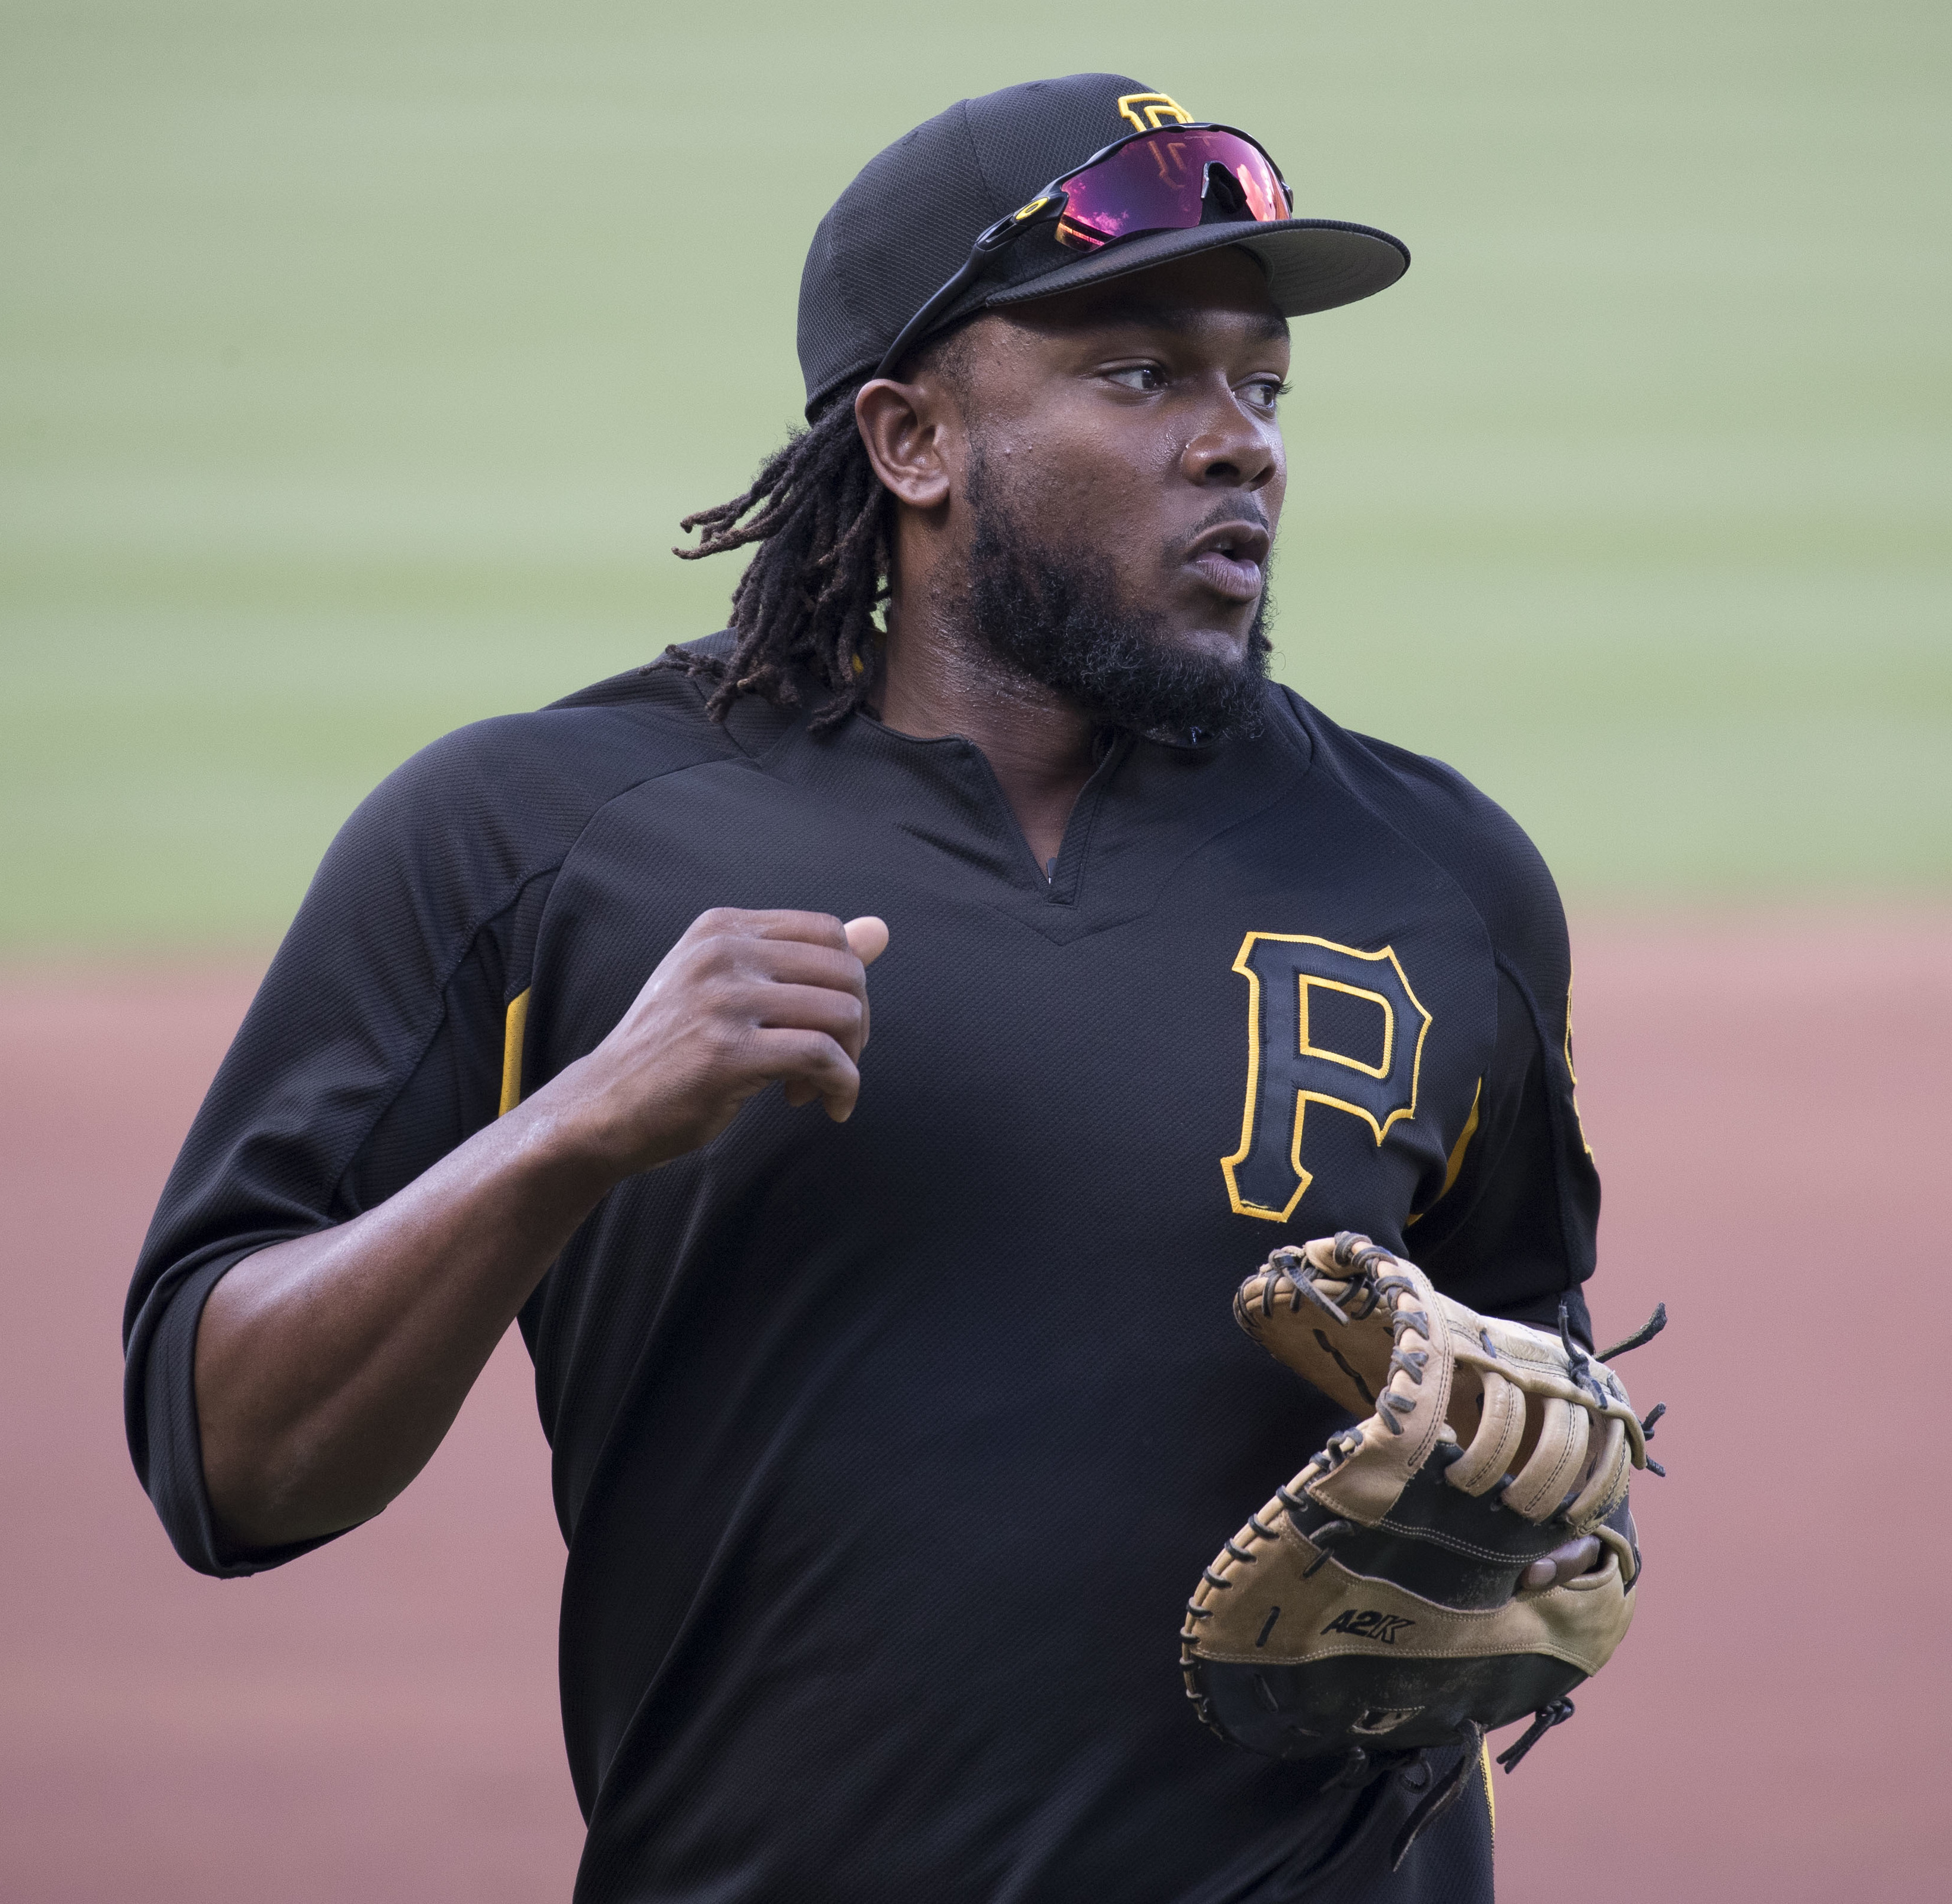 Bell strikes career high RBIs as Pirates cruise to 10-6 win over Cardinals 